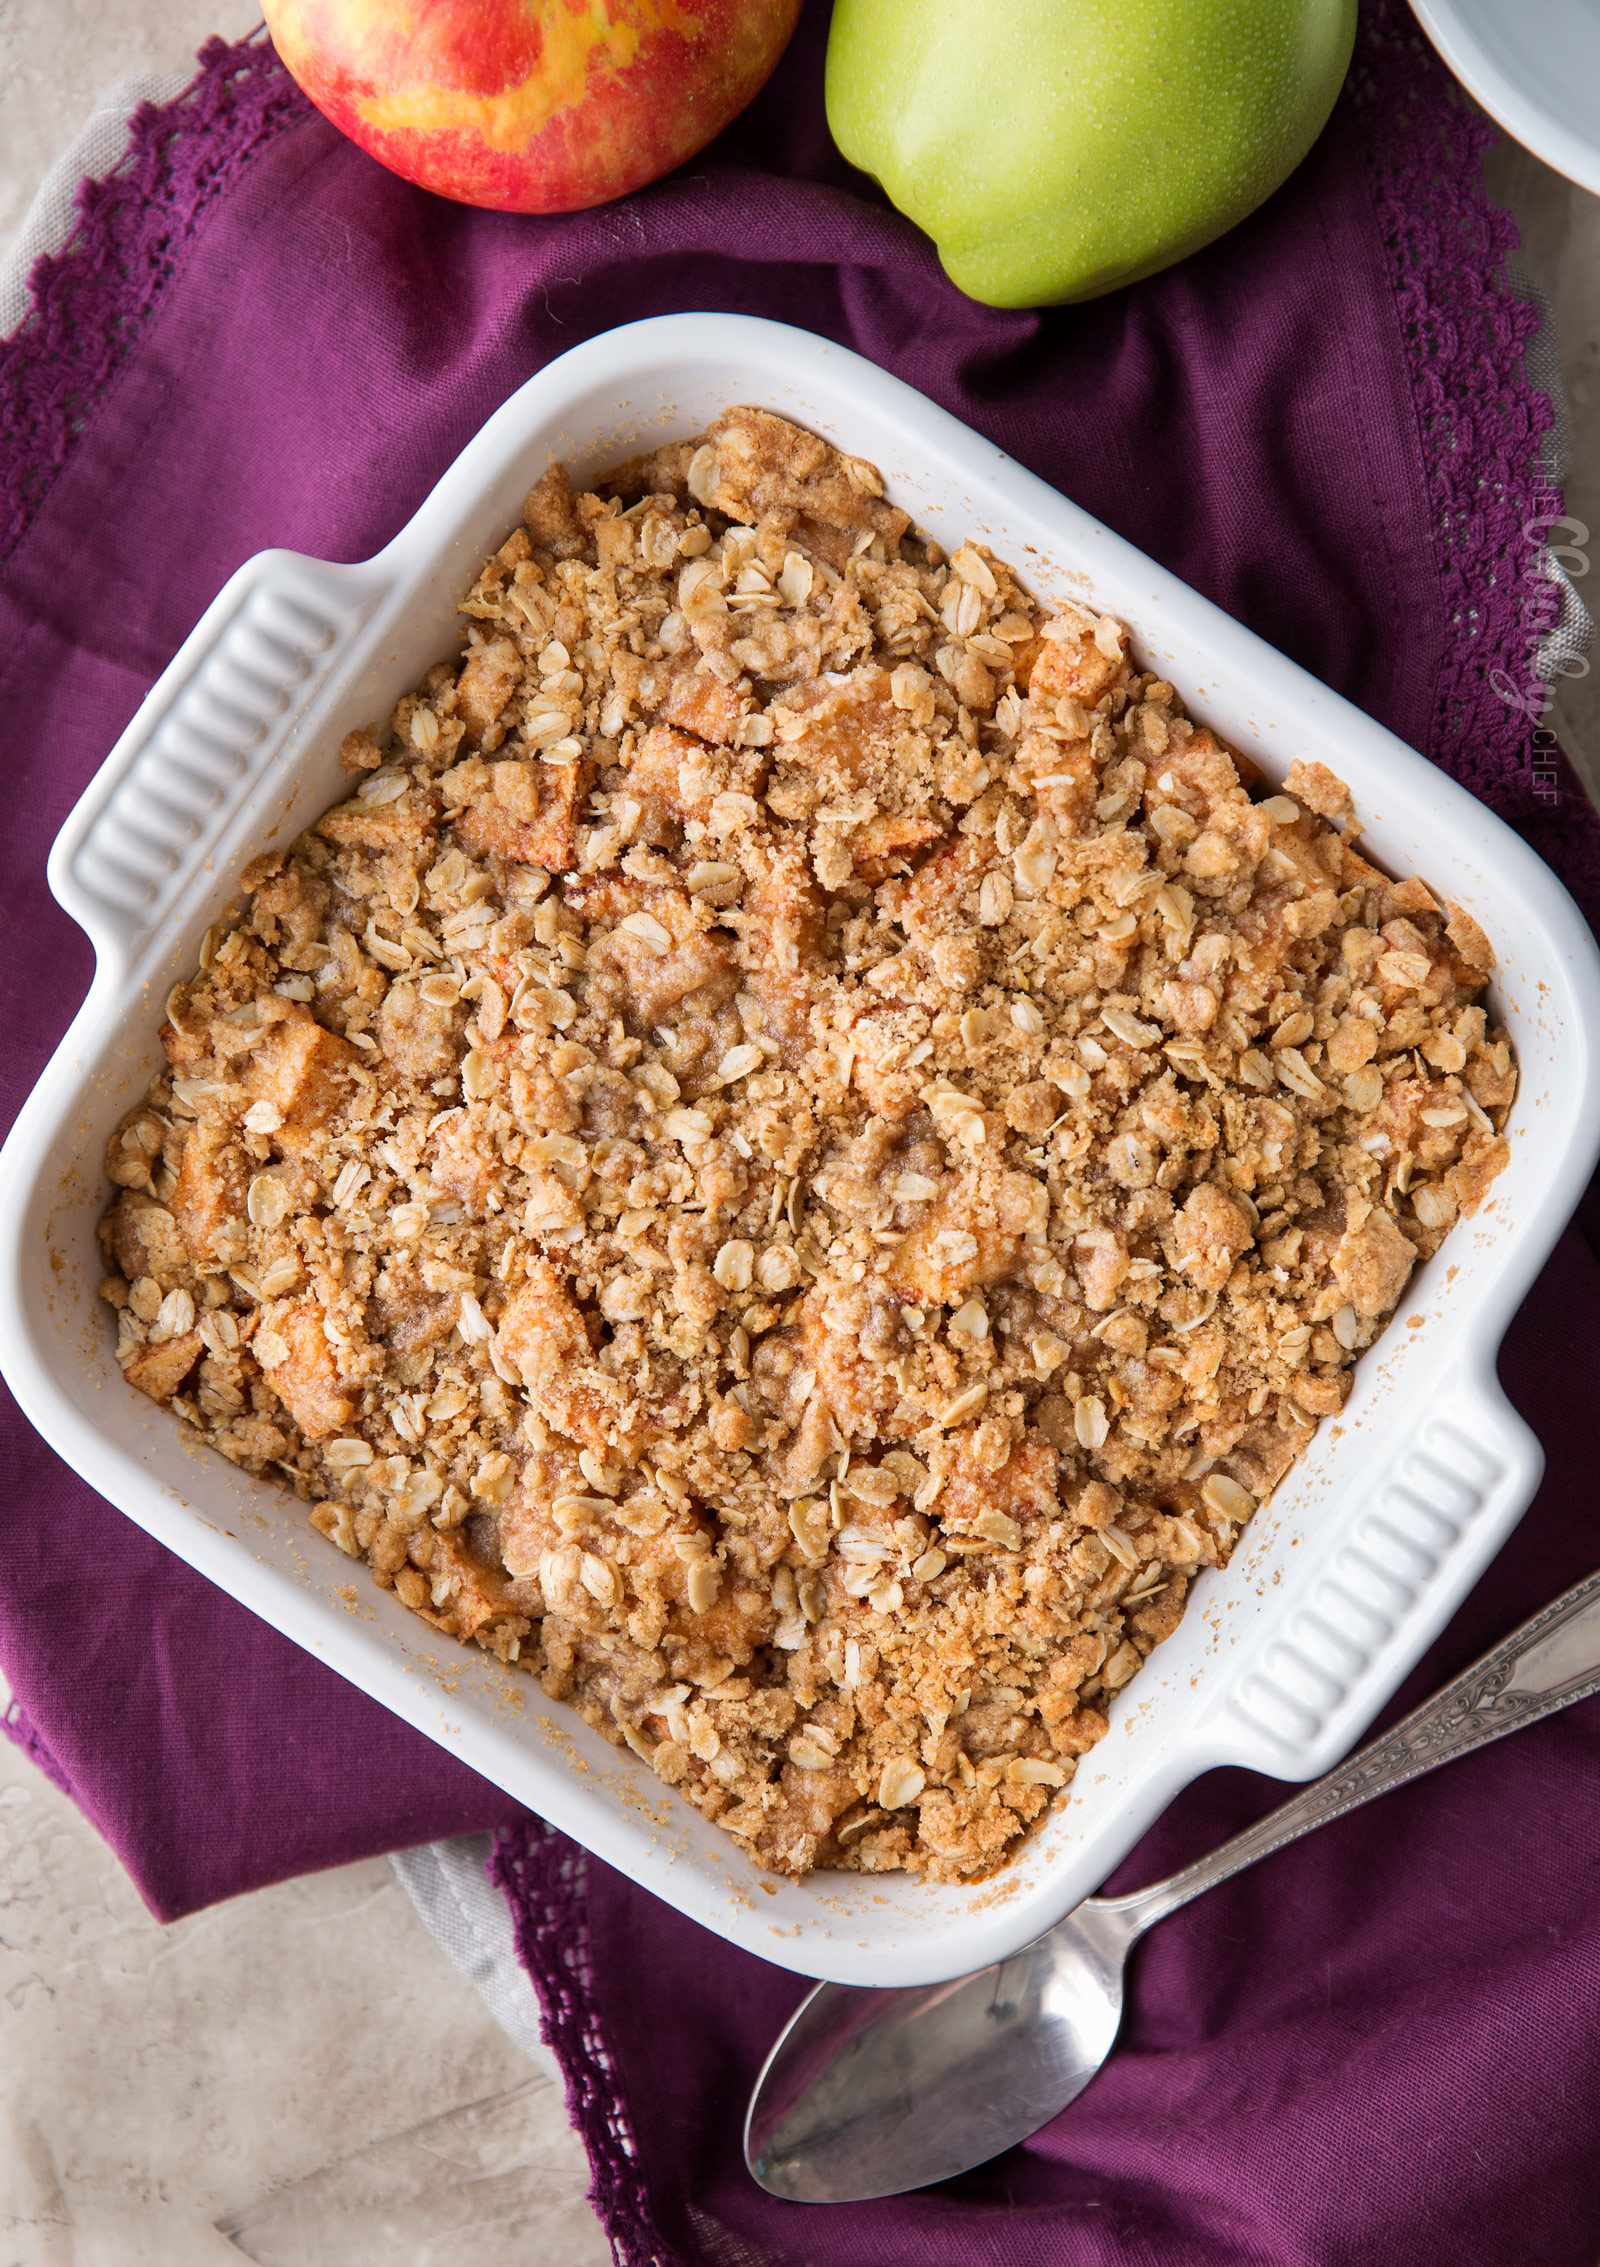 https://www.thechunkychef.com/wp-content/uploads/2017/10/Old-Fashioned-Easy-Apple-Crisp-3.jpg